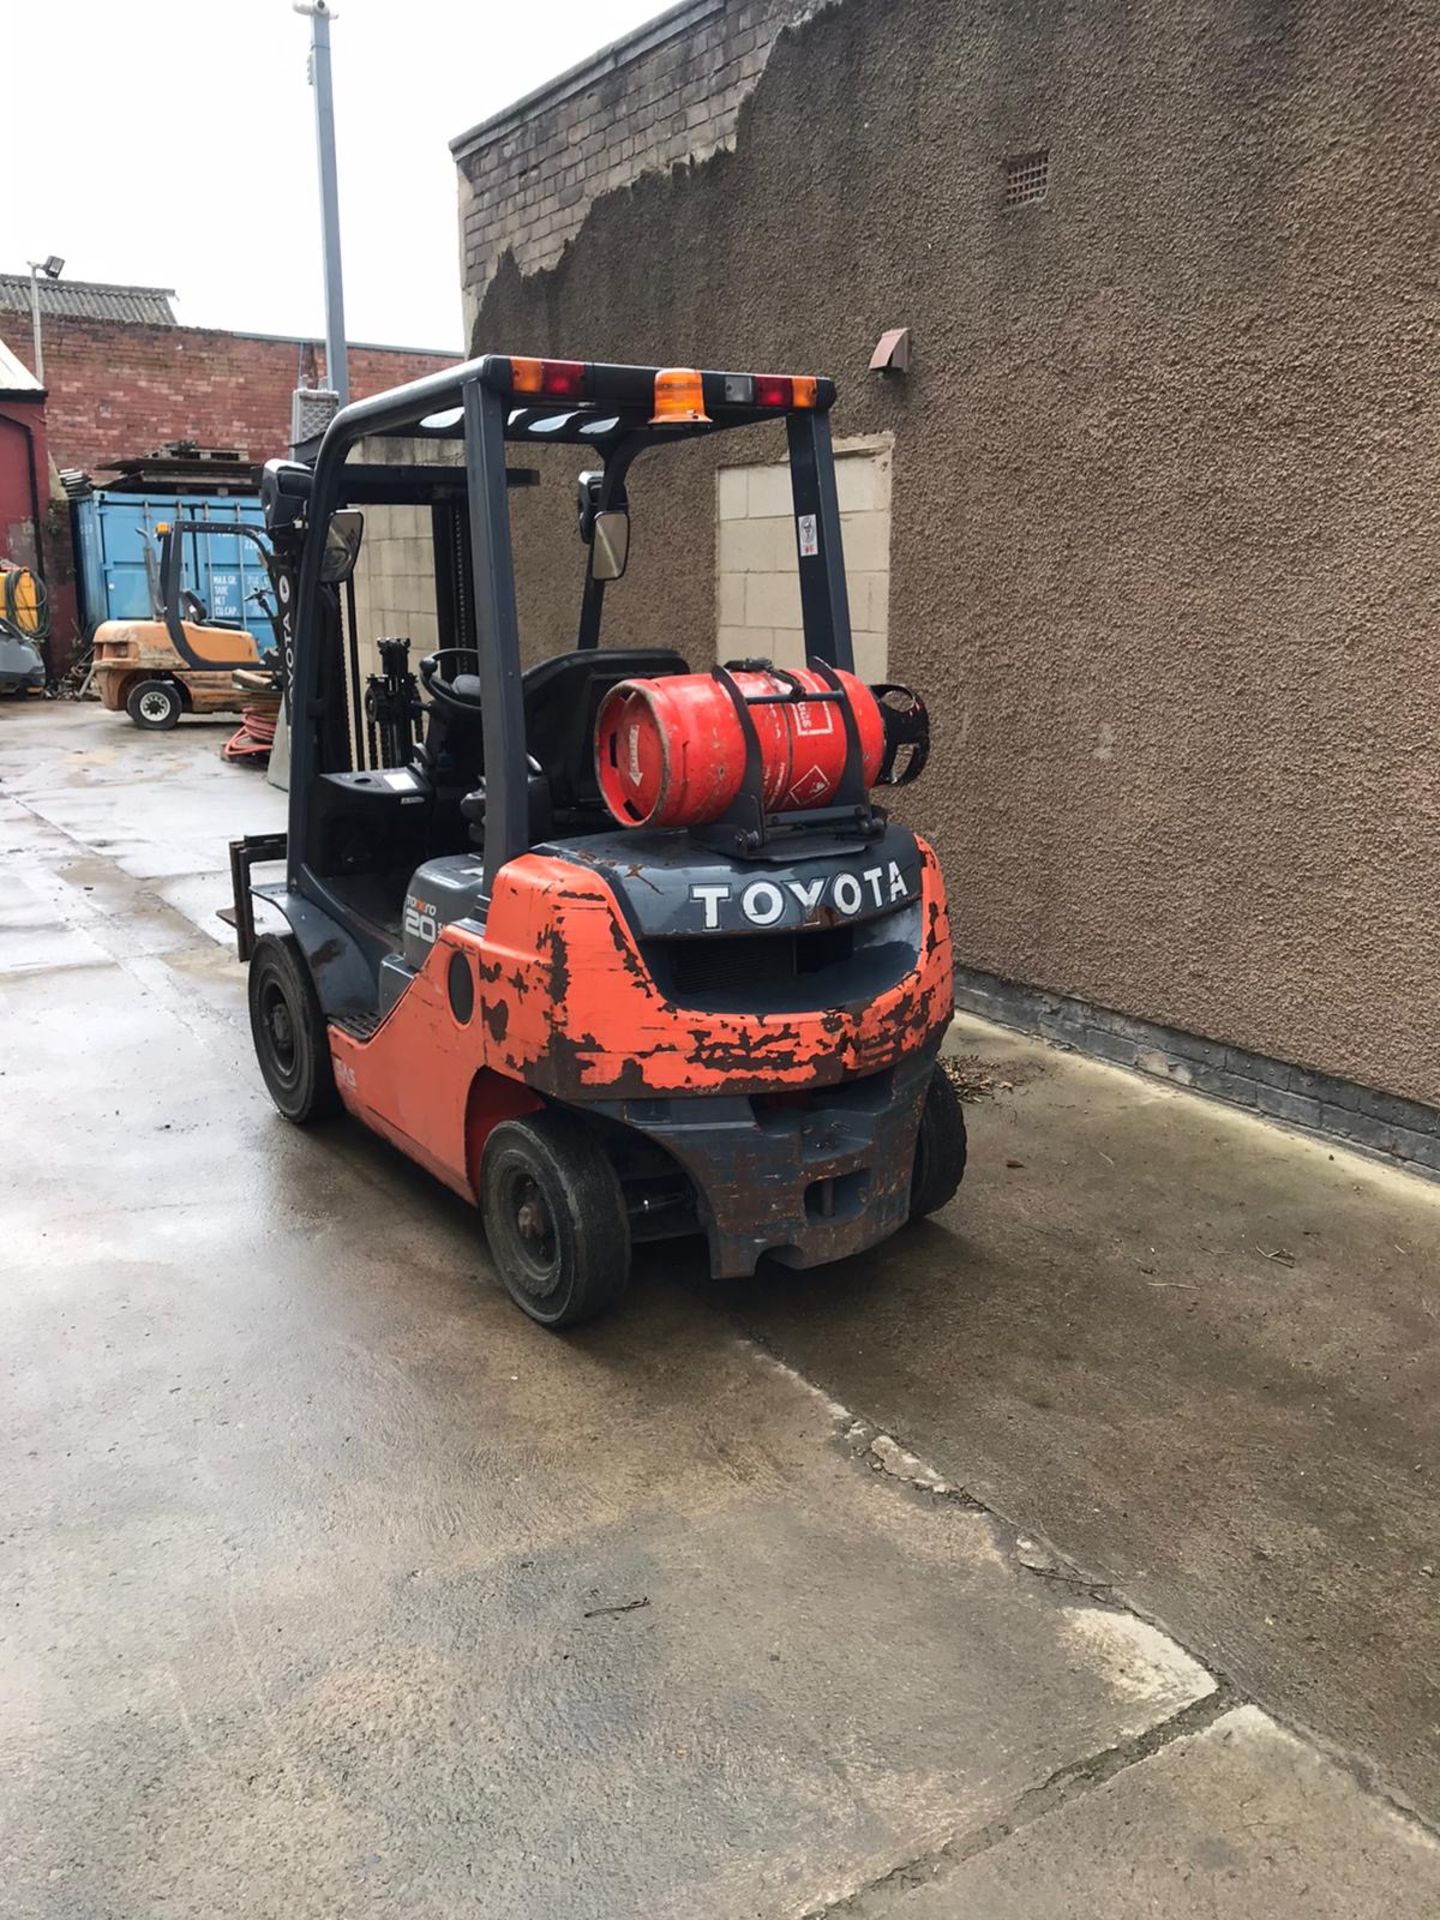 TOYOTA 2 TON GAS FORKLIFT, SERIES 8, MODEL 02-8FGFG20, CONTAINER SPEC, COUNTERBALANCE WITH SIDESHIFT - Image 5 of 7